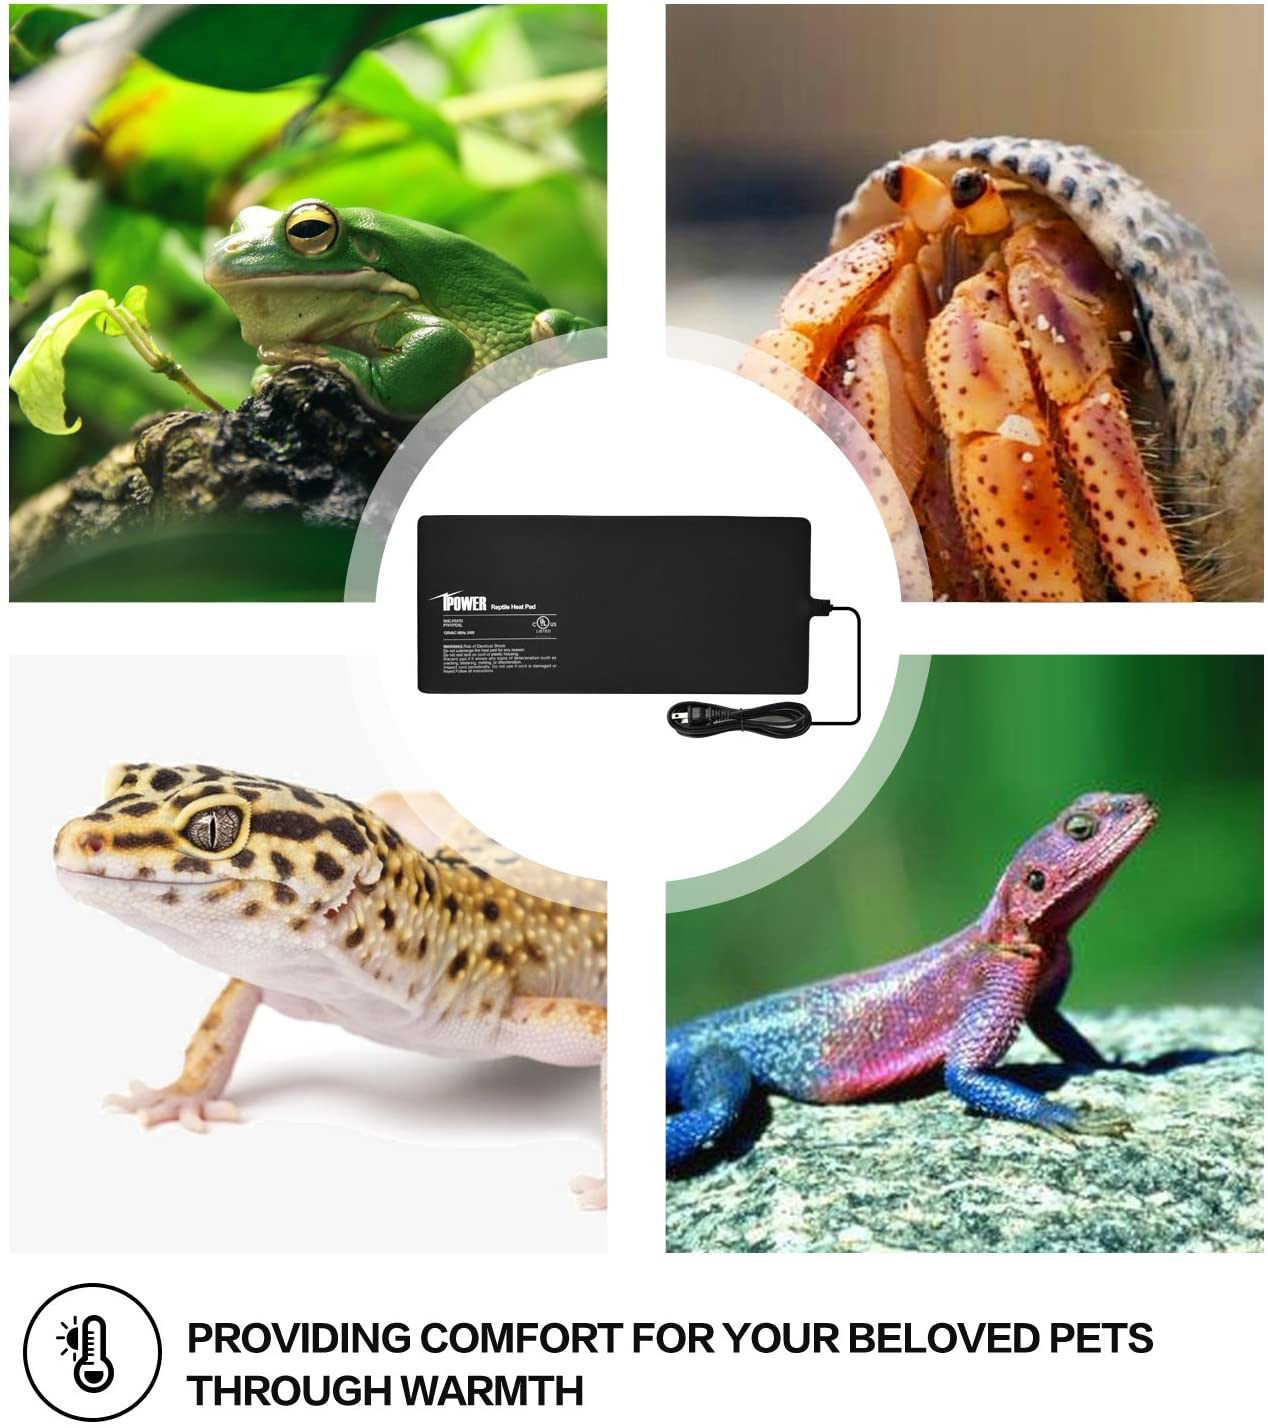 Ipower Reptile Heat Pad 4W/8W/16W/24W under Tank Terrarium Warmer Heating Mat and Digital Thermostat Controller for Turtles Lizards Frogs and Other Small Animals, Multi Sizes